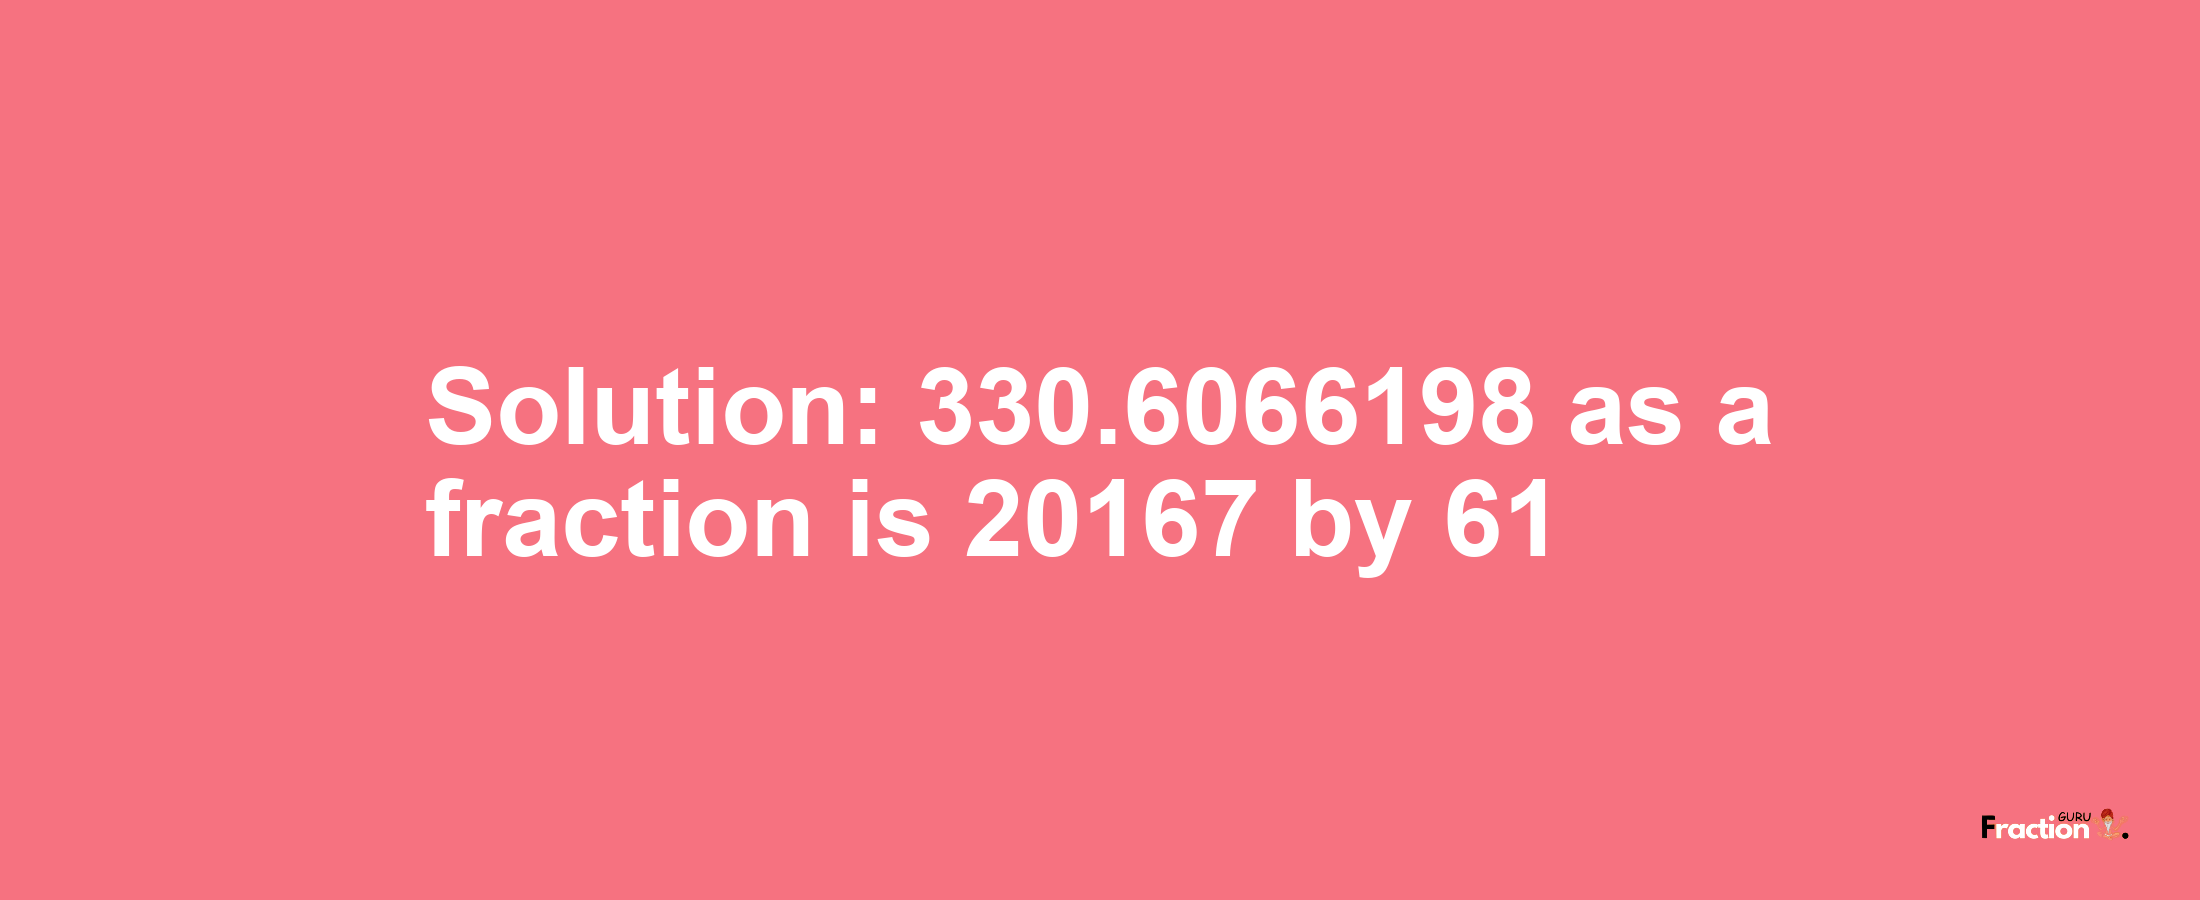 Solution:330.6066198 as a fraction is 20167/61